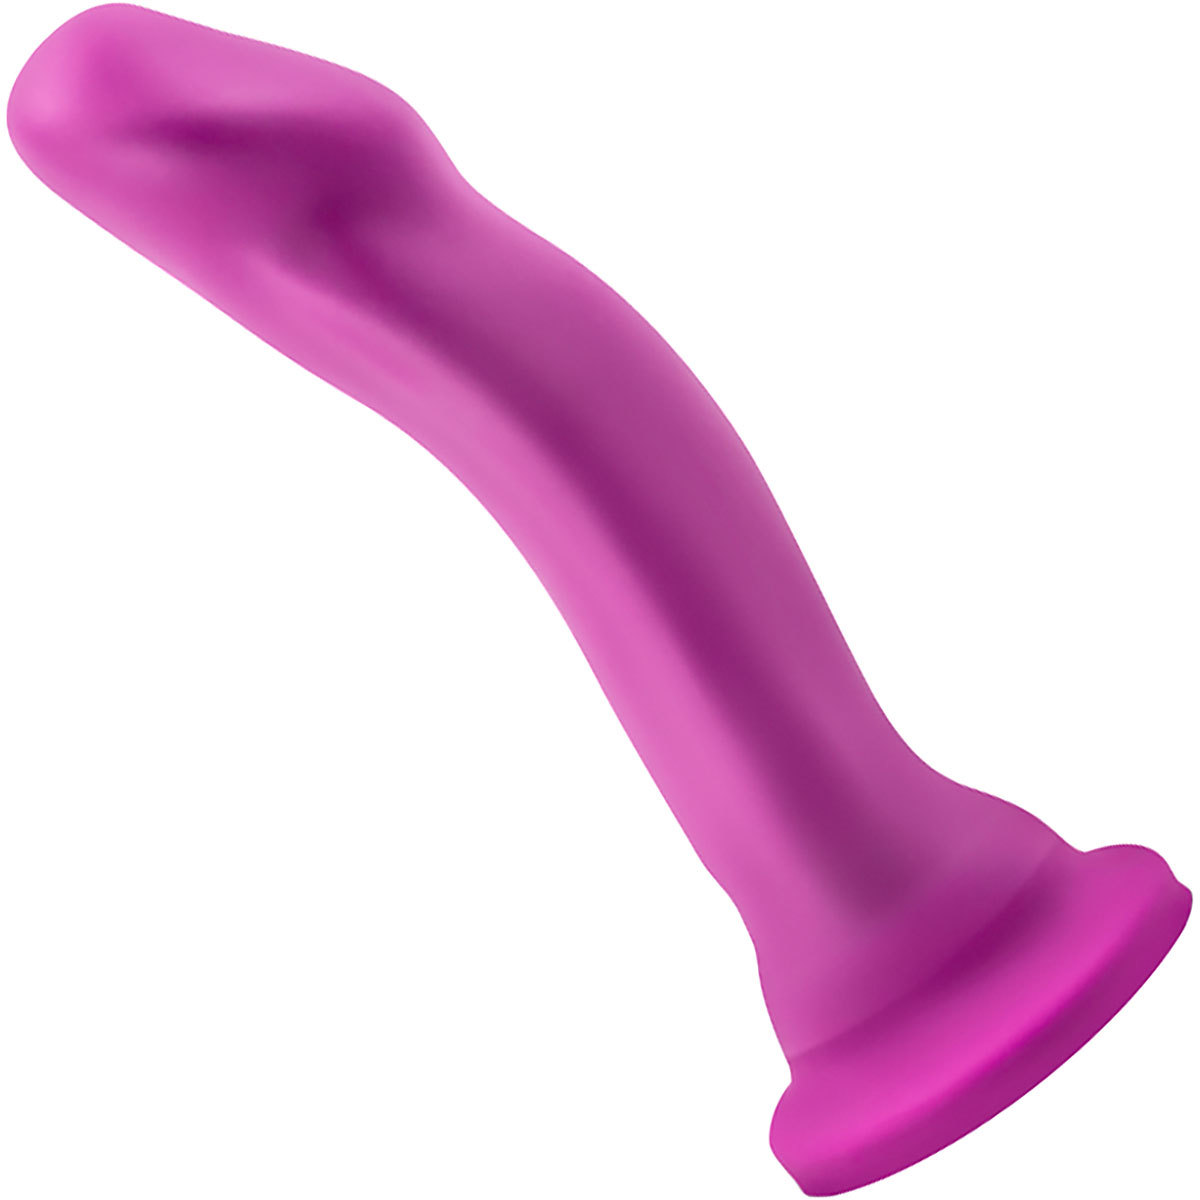 Real Nude Helio Silicone Suction Cup Dildo